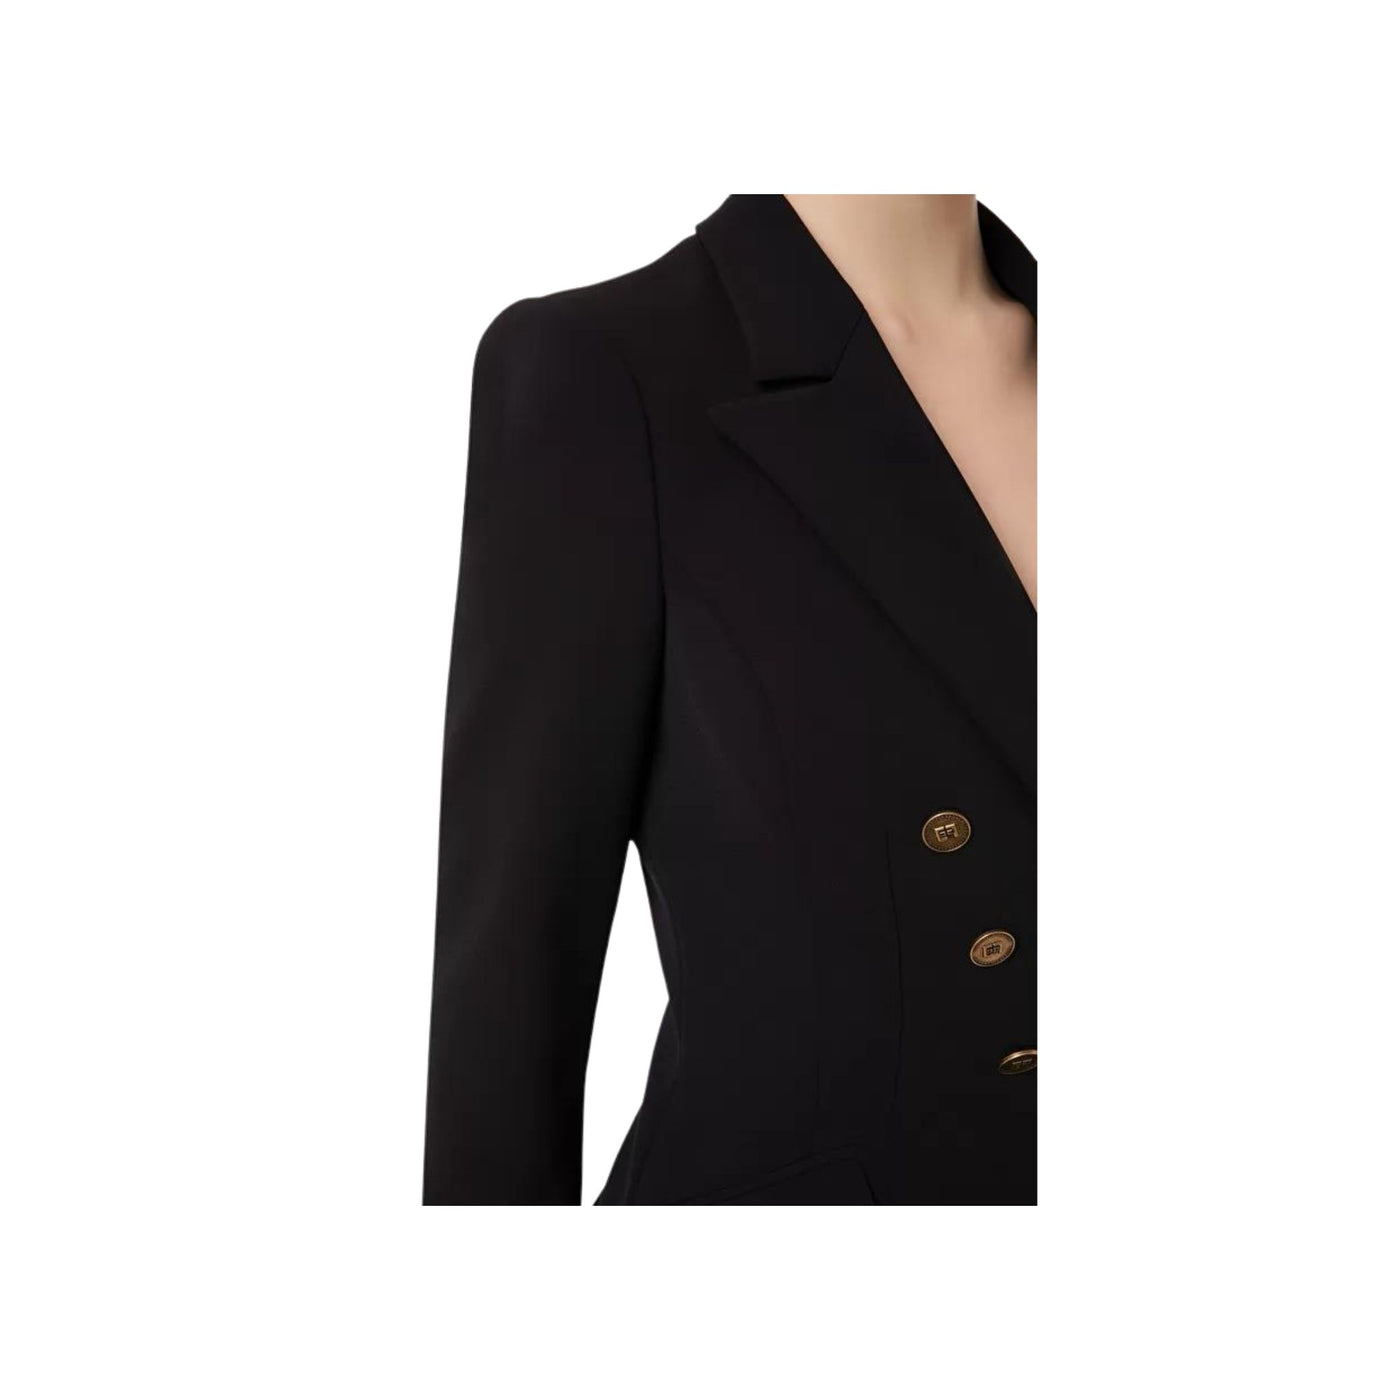 Women's jacket with double-breasted closure